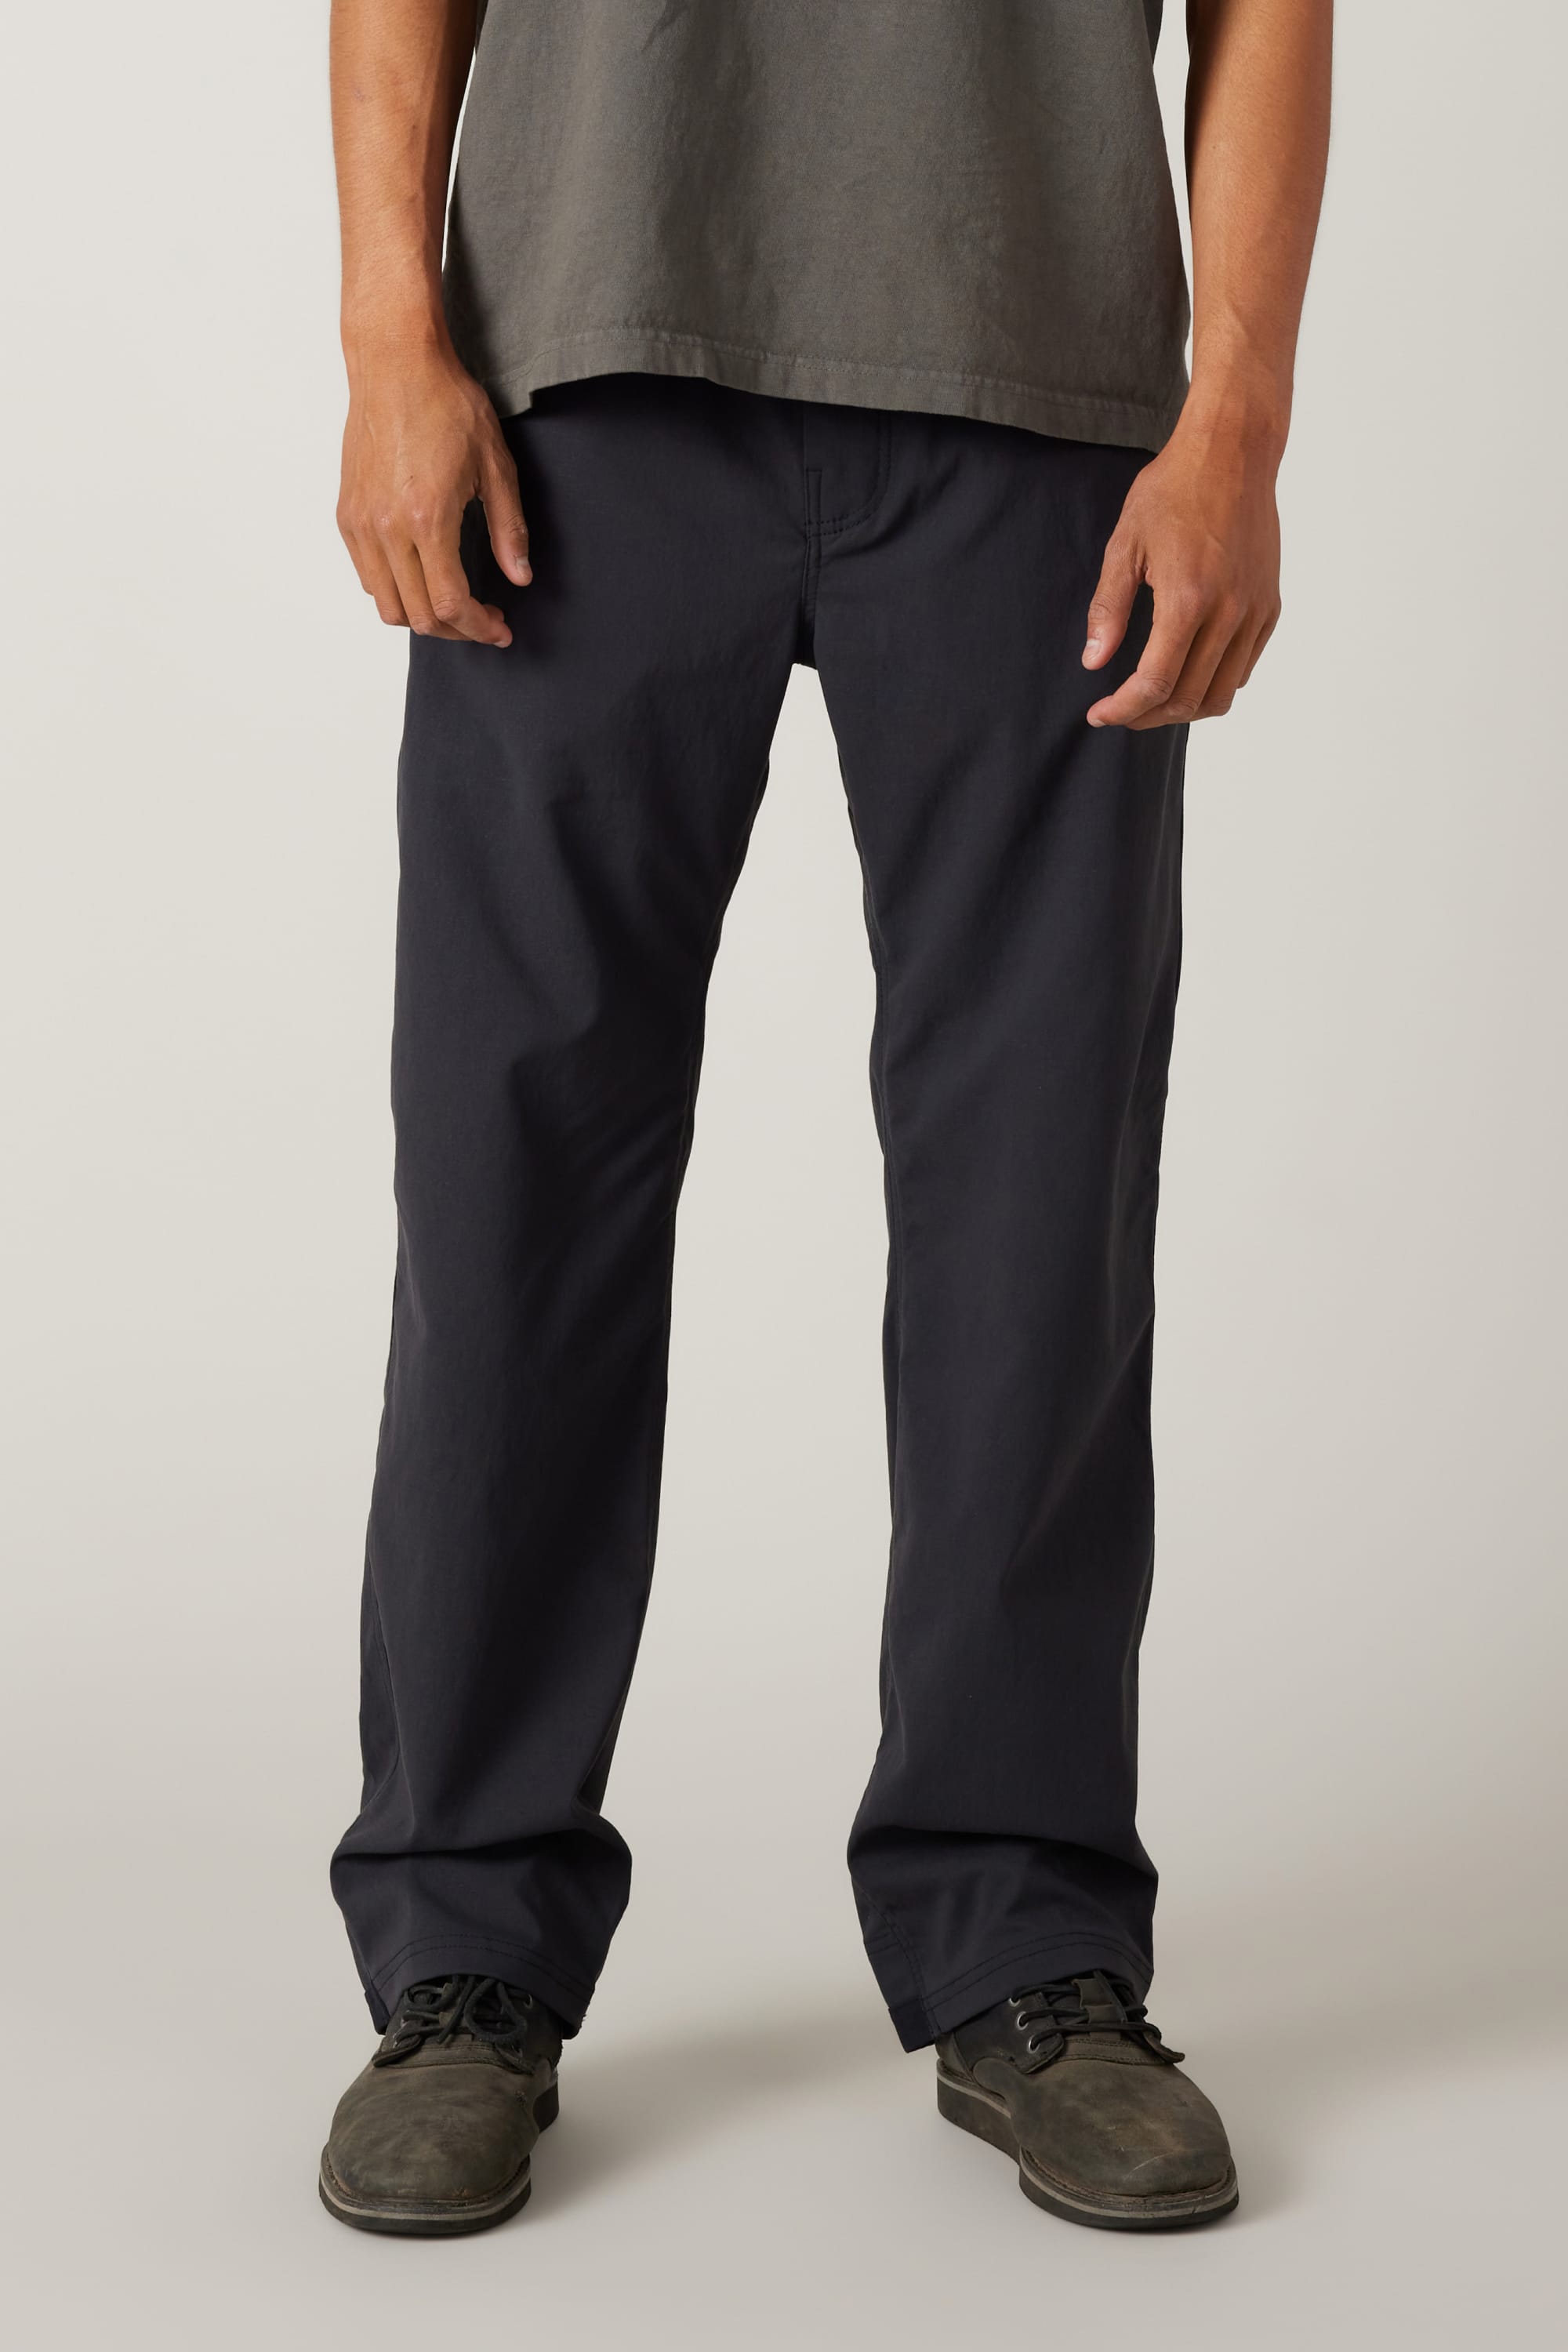 686 Men's Unwork Everywhere Pant - Relaxed Loose Fit – 686.com